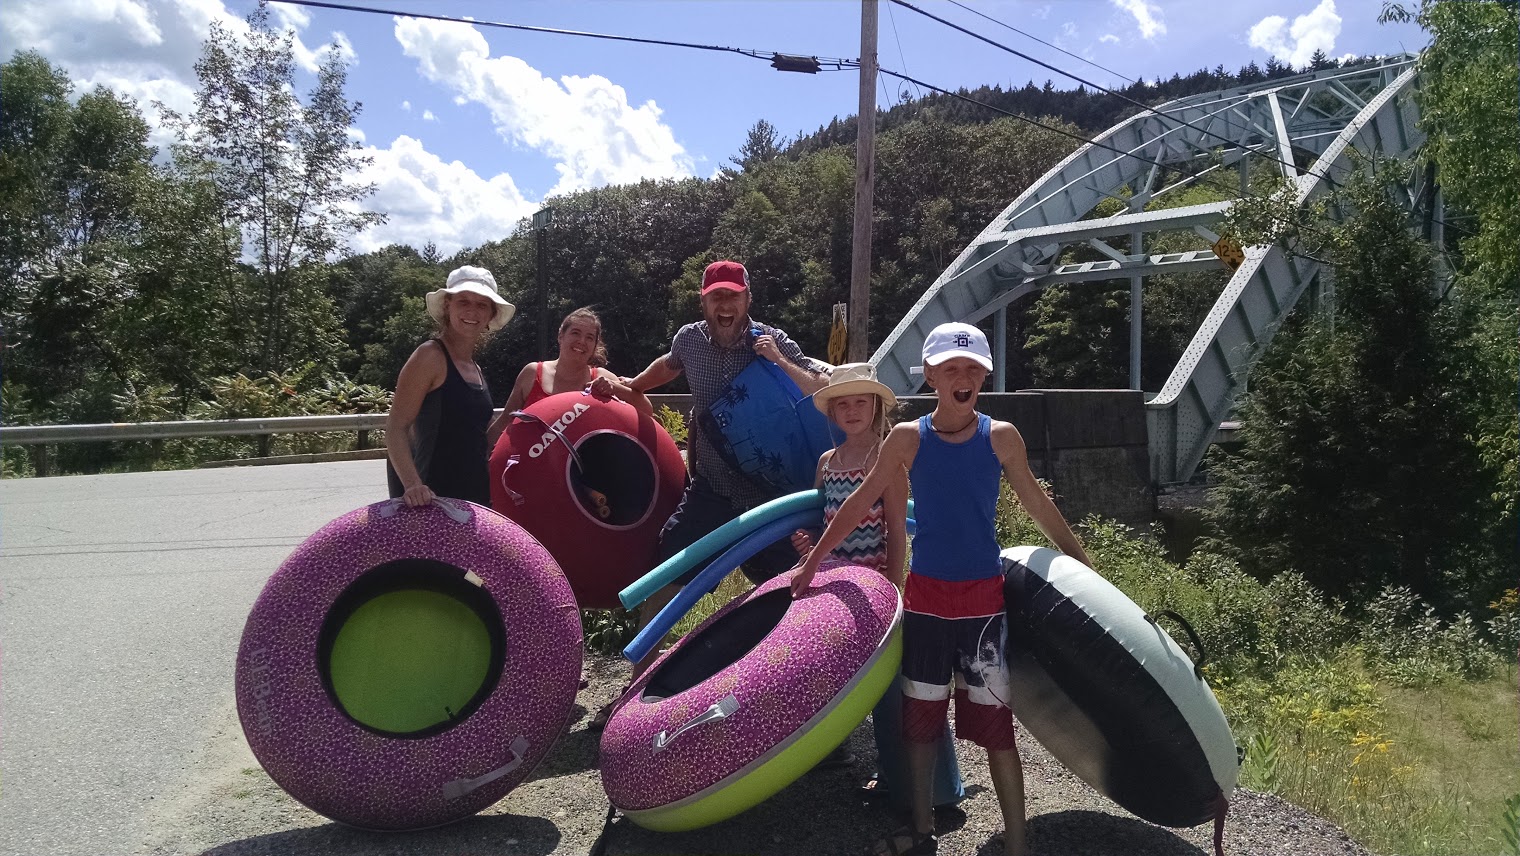 River Tubing with Kids